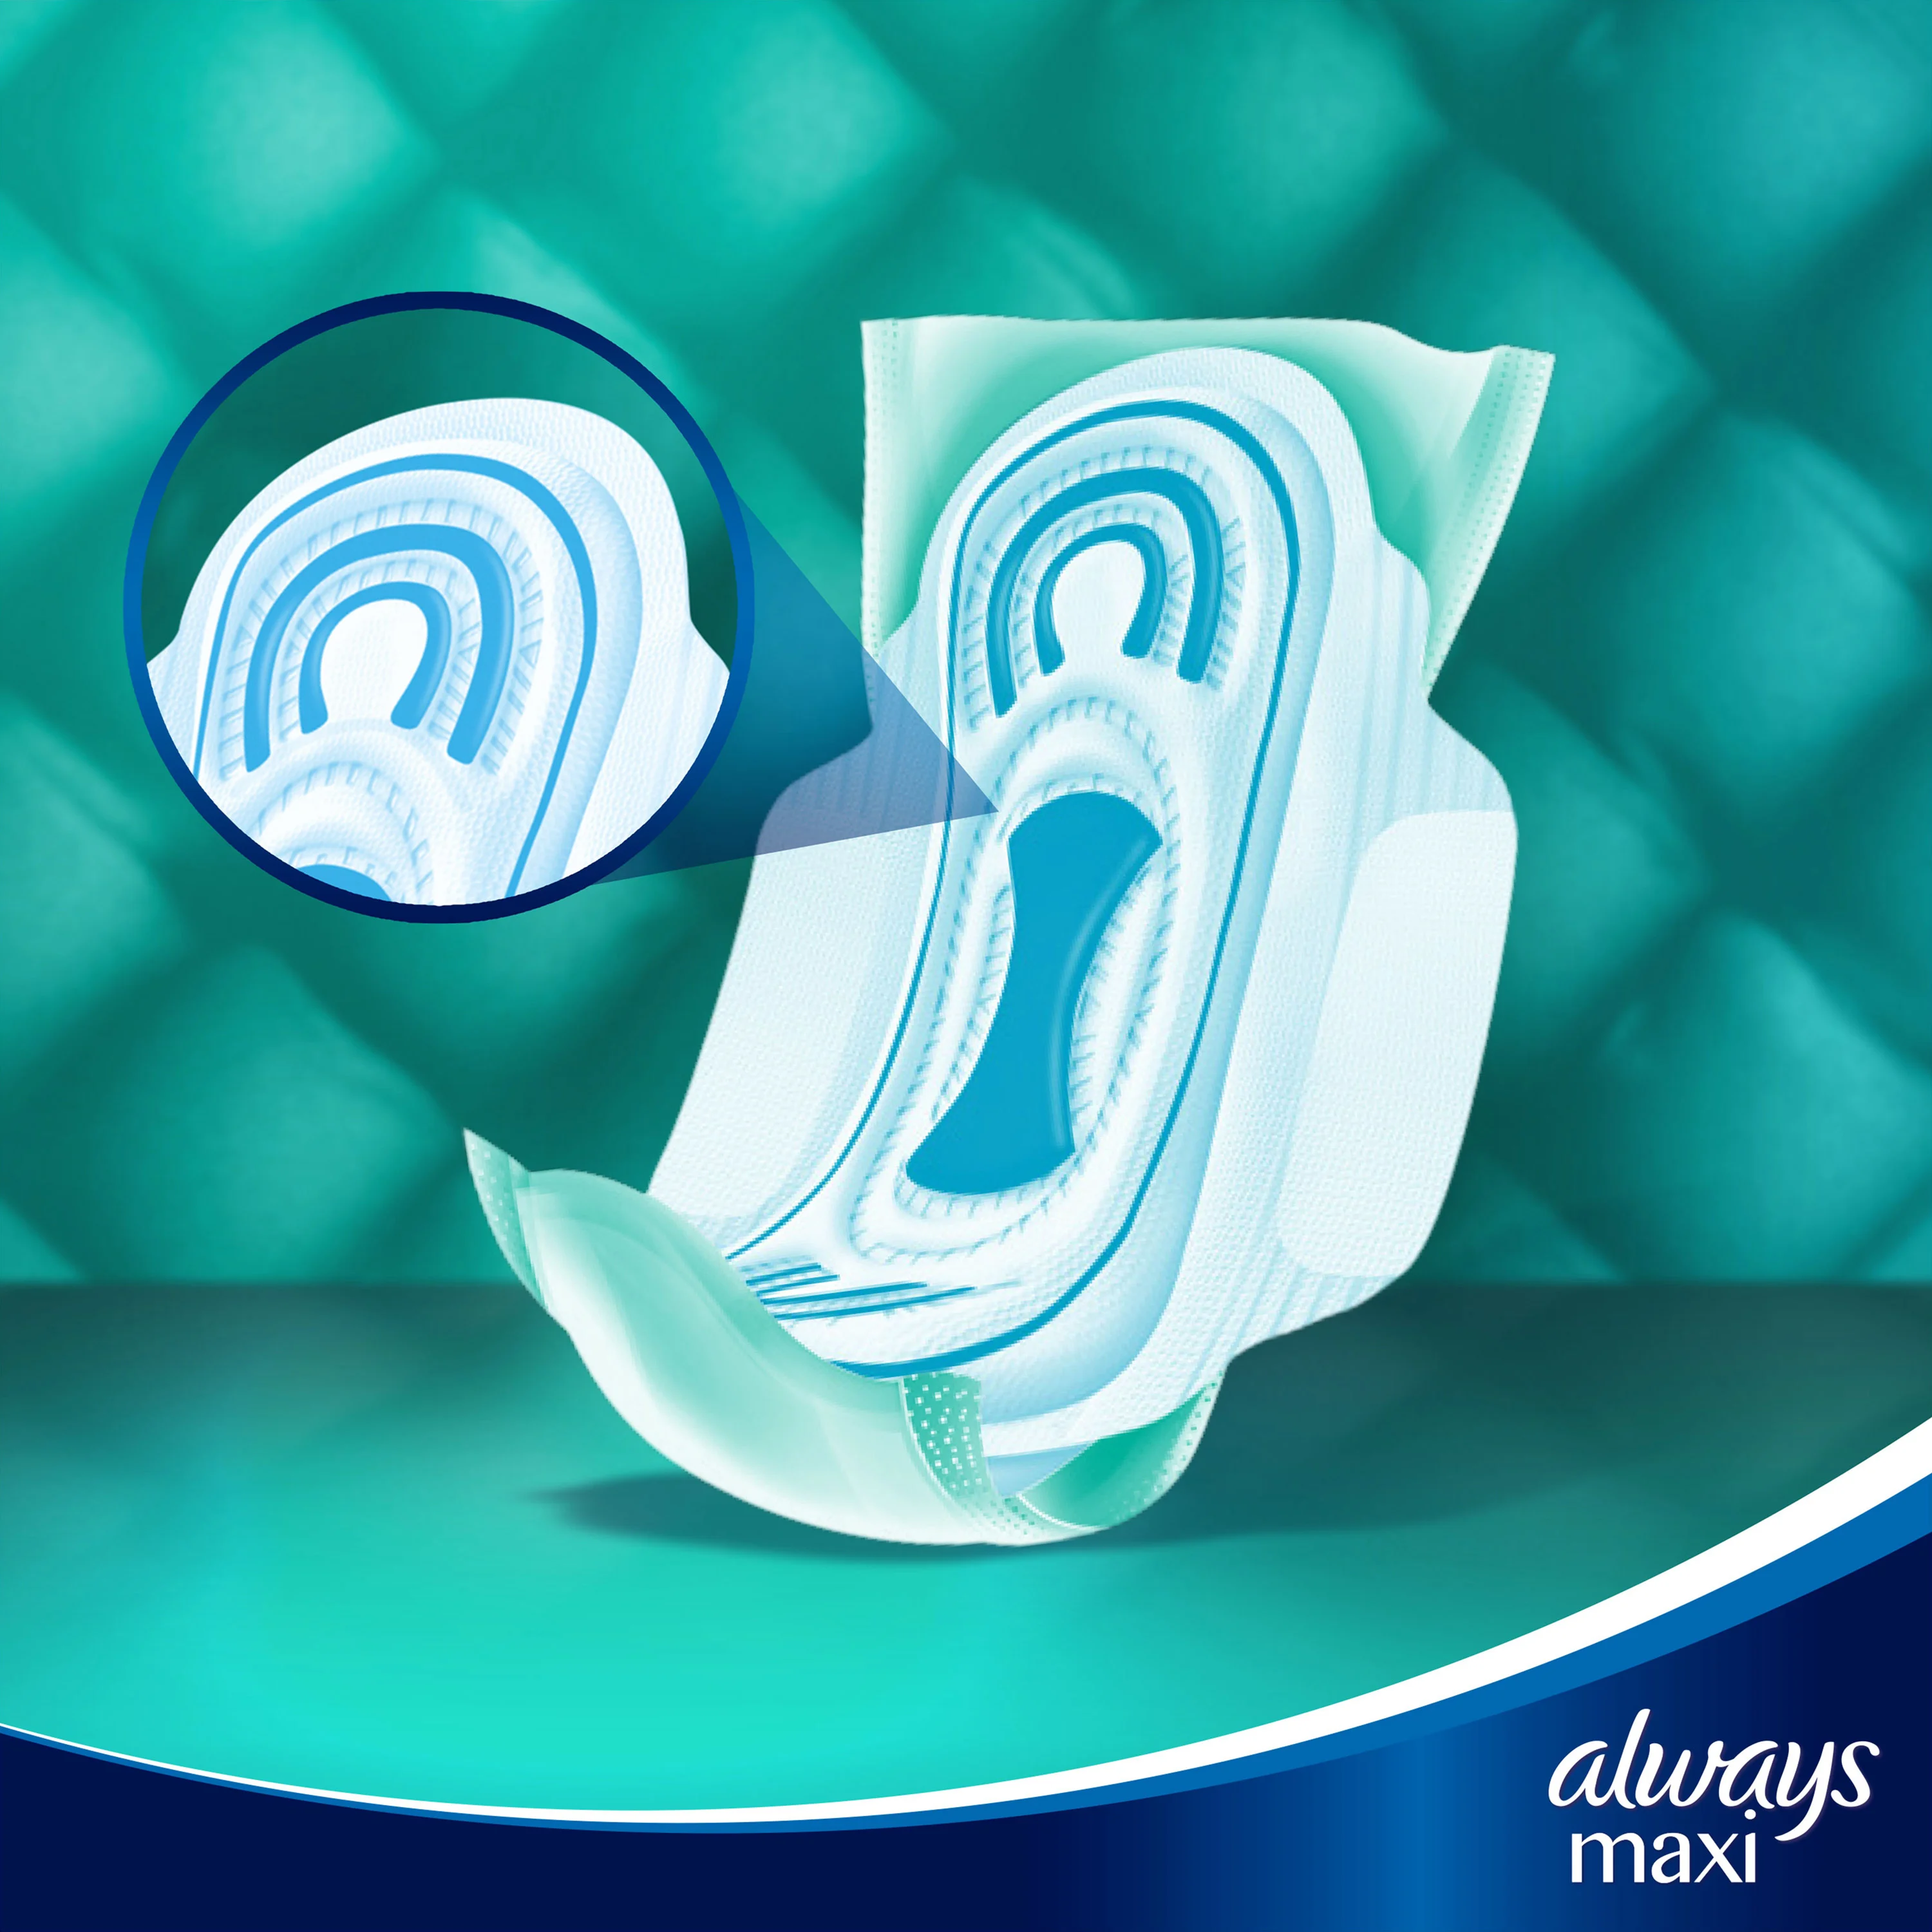 Extra absorbent core in Always Maxi sanitary pad